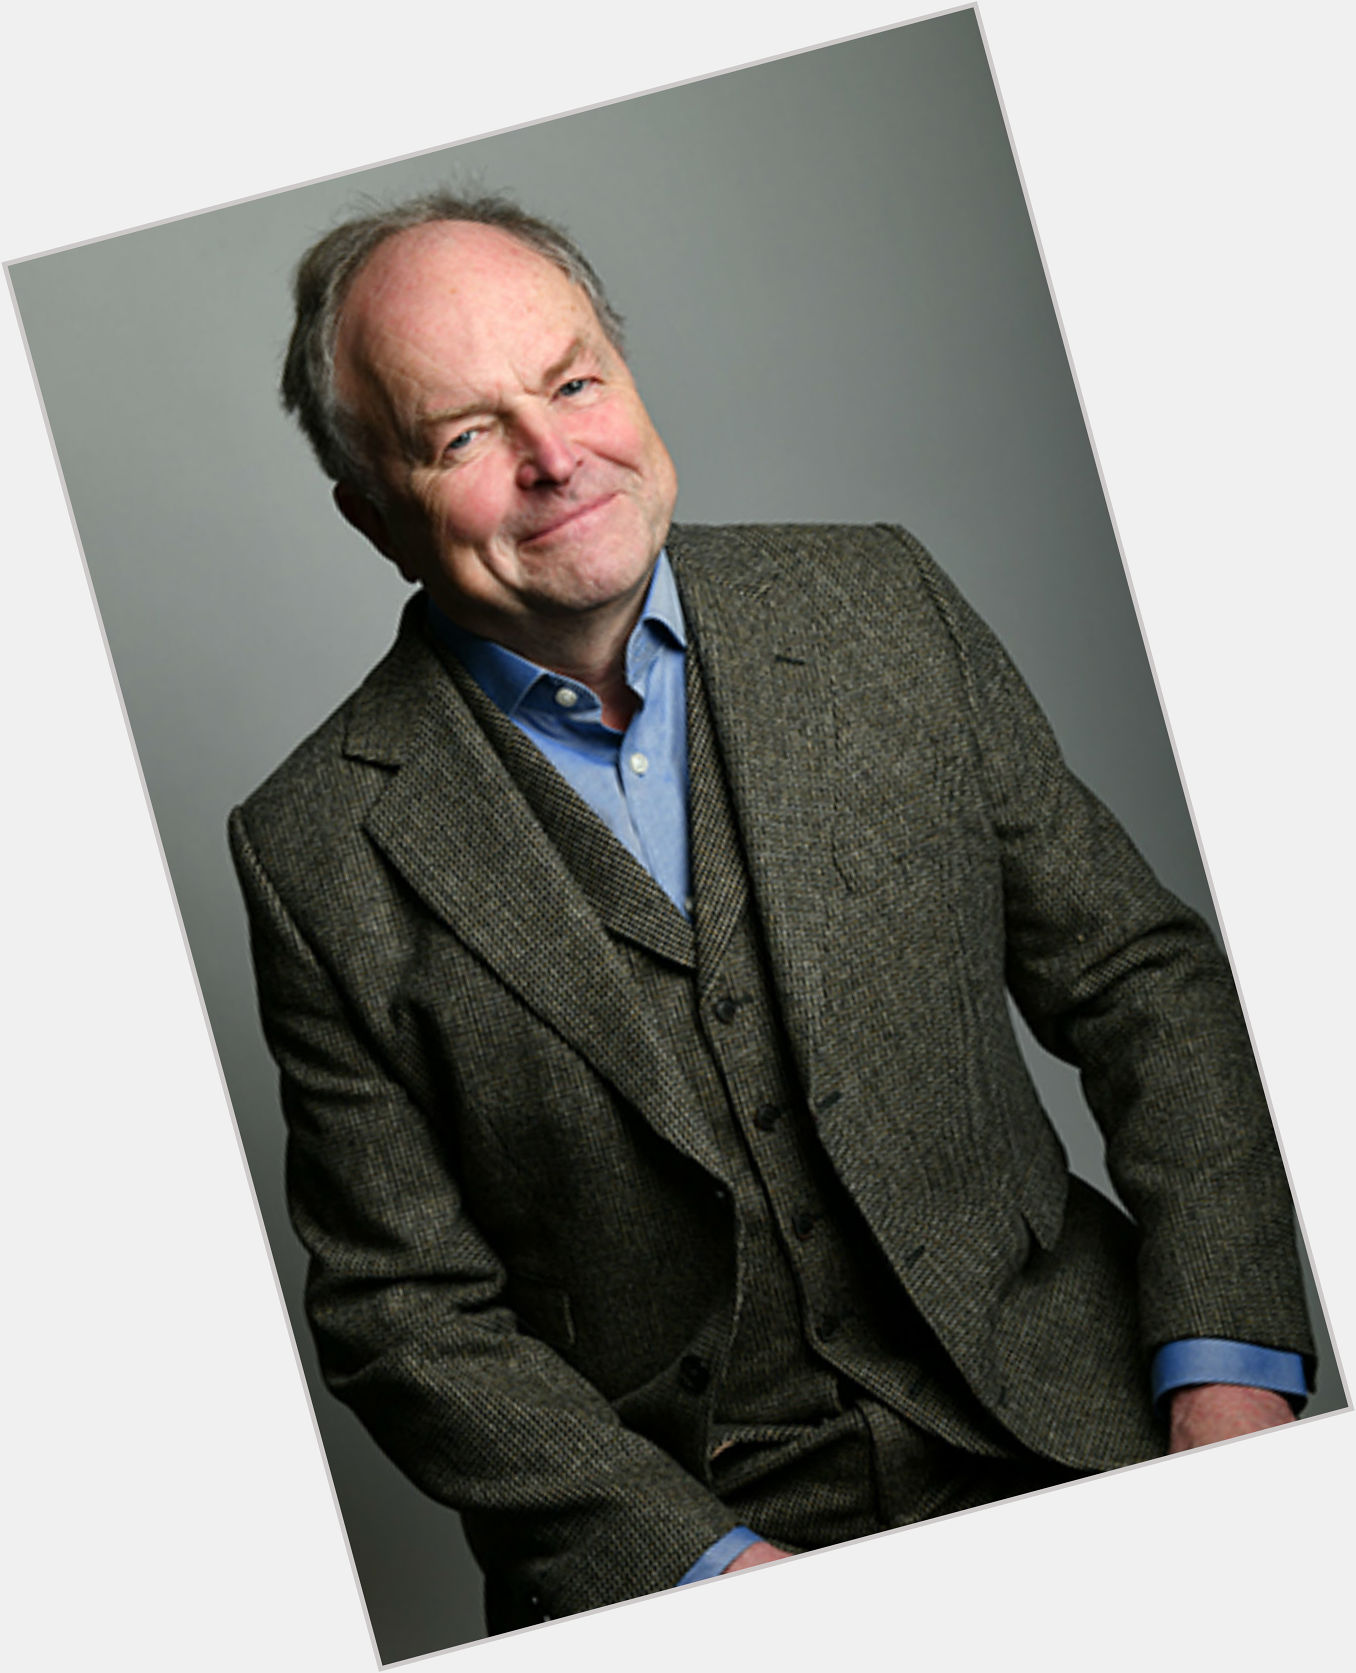 Https://fanpagepress.net/m/C/Clive Anderson Dating 2